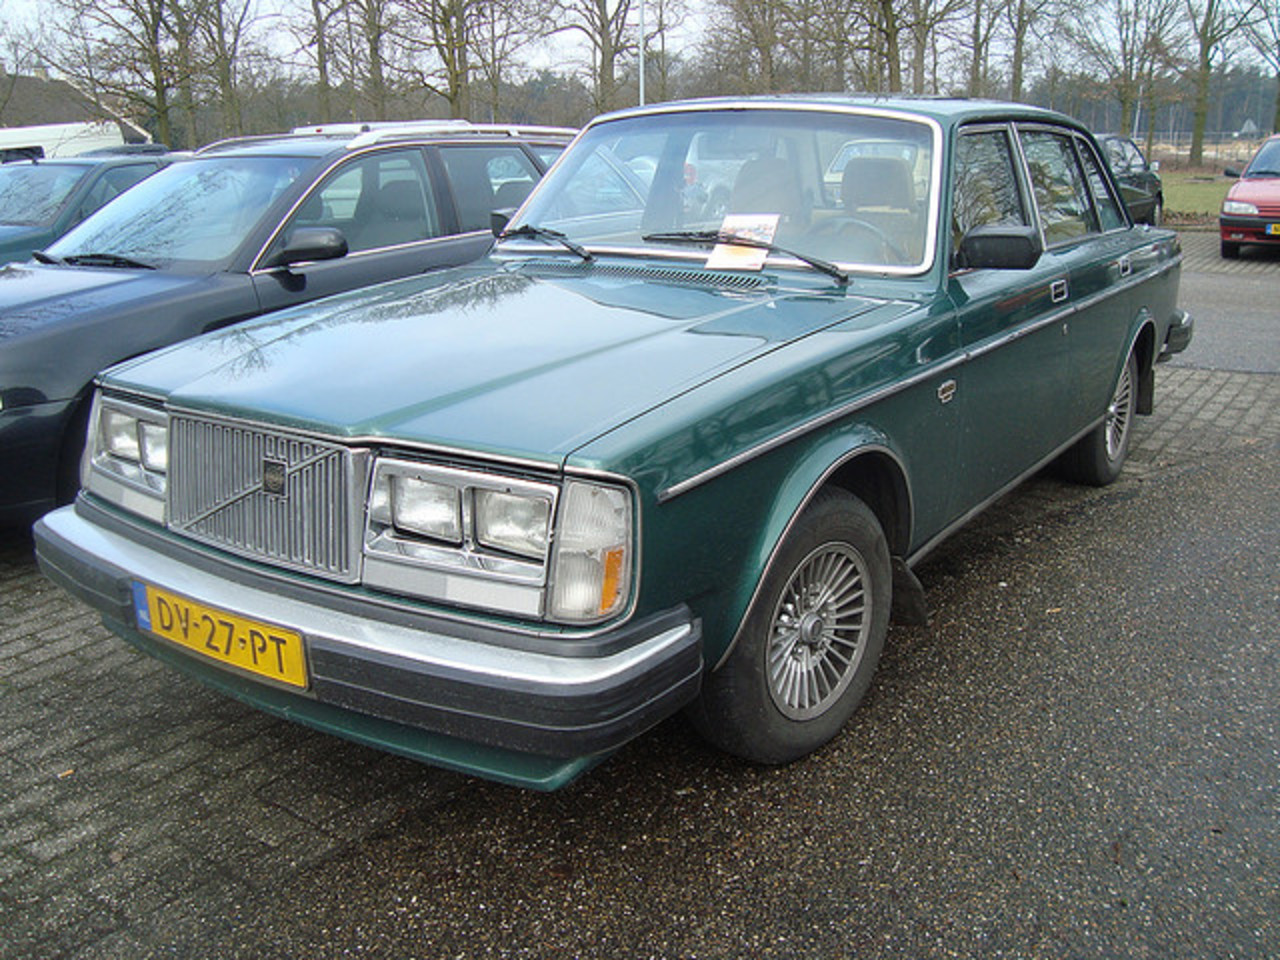 1979 Volvo 264 GLE (automatic) | Flickr - Photo Sharing!